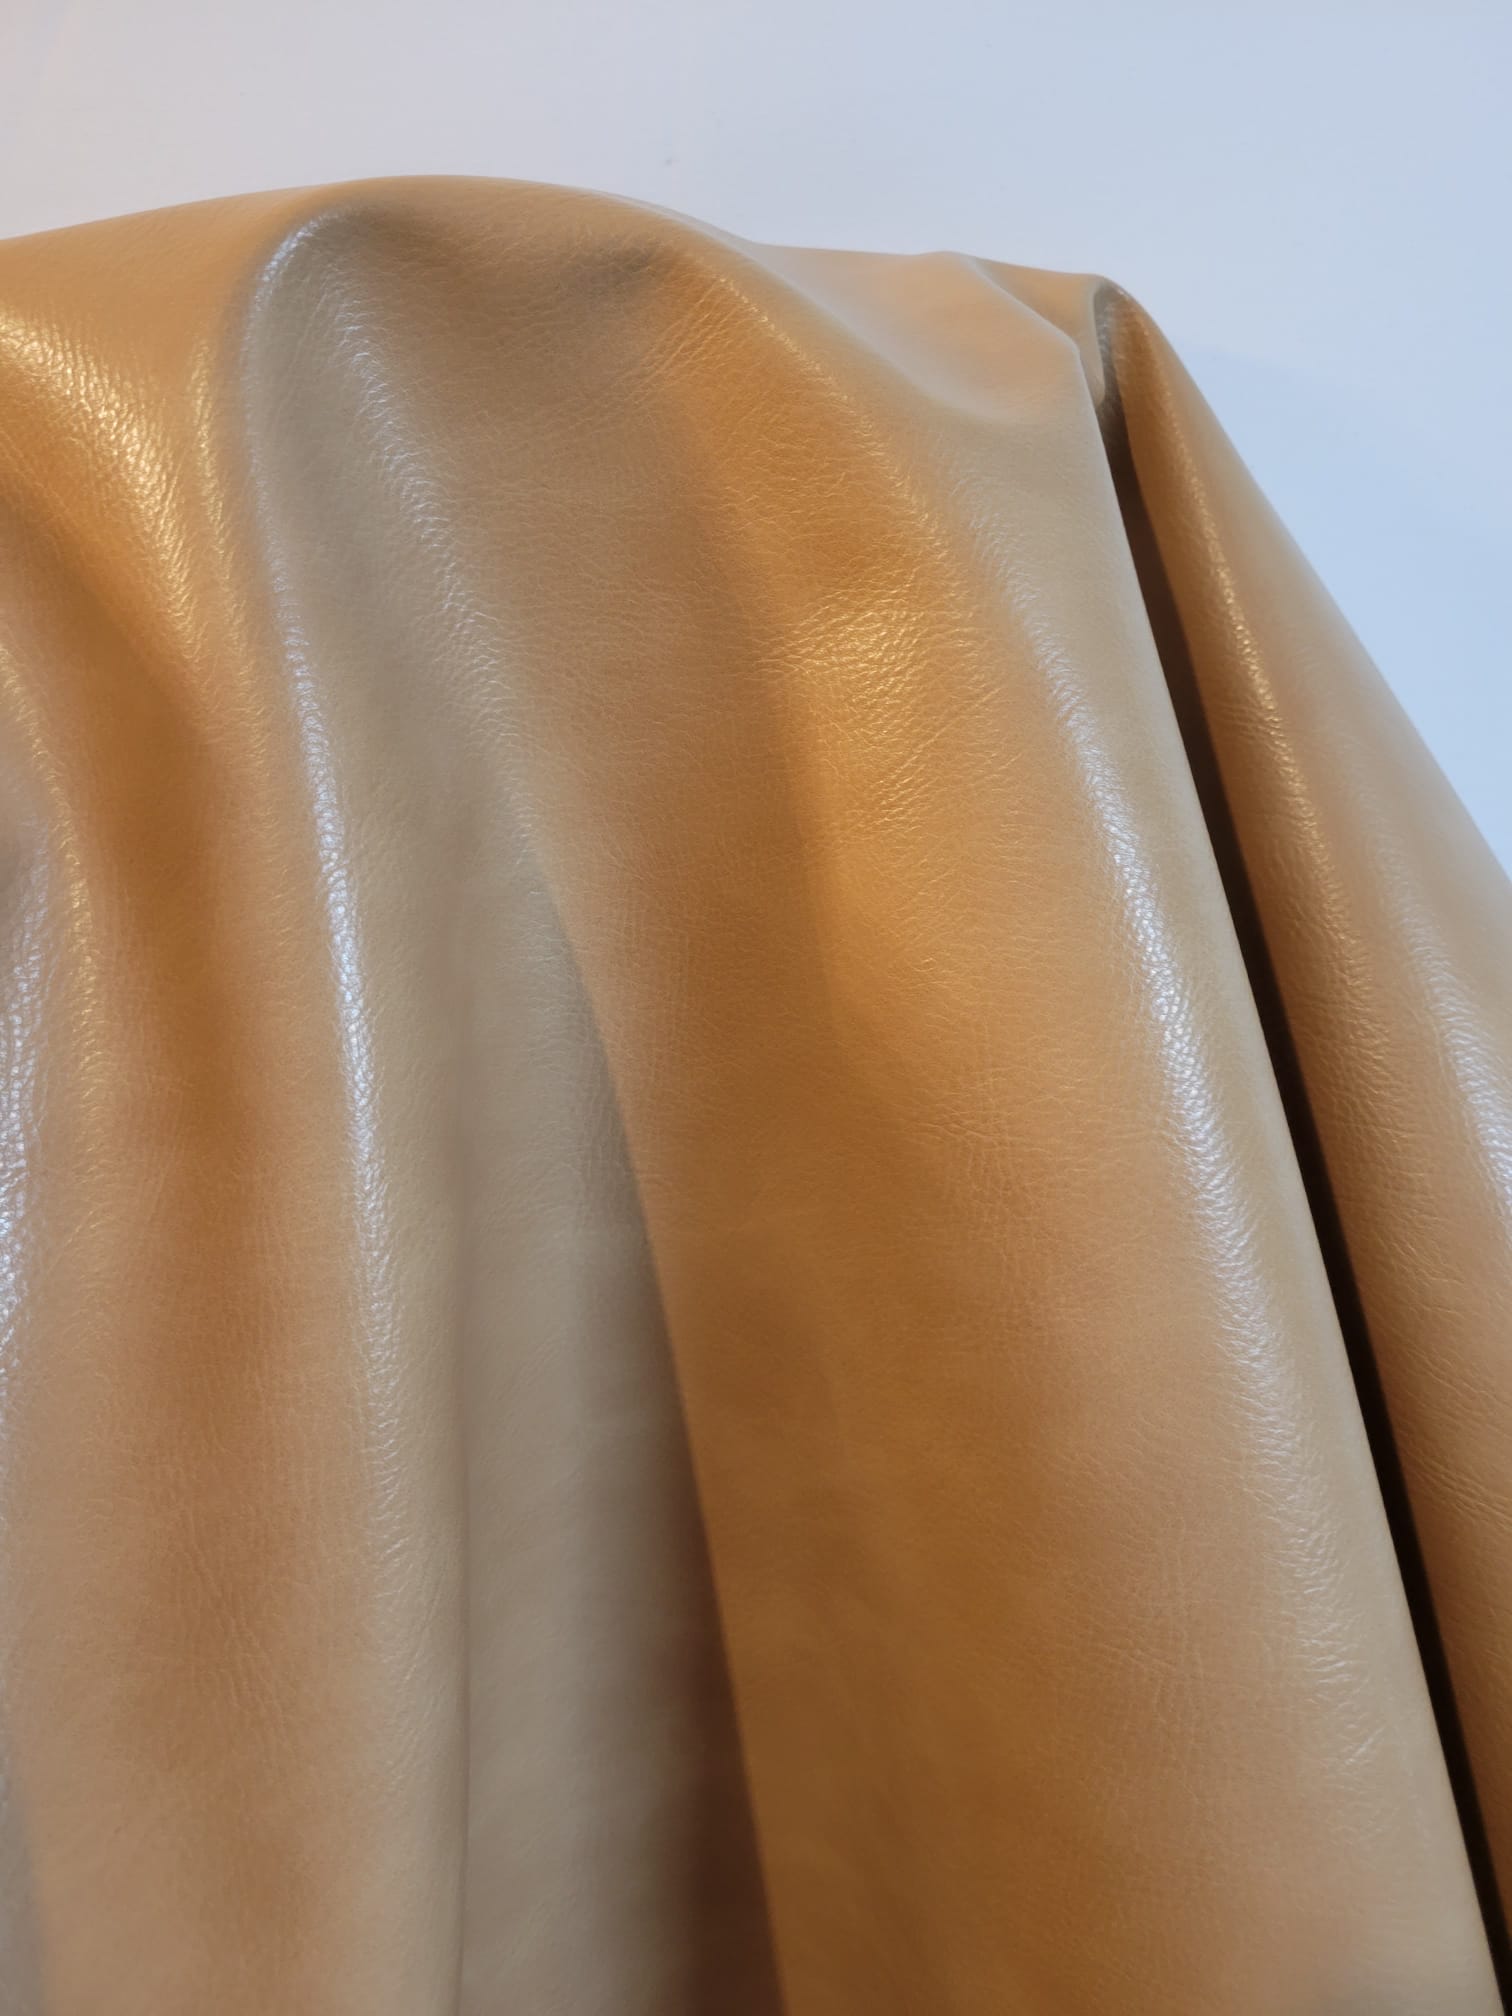  Faux vegan leather by the yard sheets distressed leather fabric for upholstery 30,000 Double Rubs vinyl sheets nappa leather crafts bookbinding books furniture fabrics uphilstery fuax material pu pleather faiux learher cruelty free nappa seat wheat pebble grain 